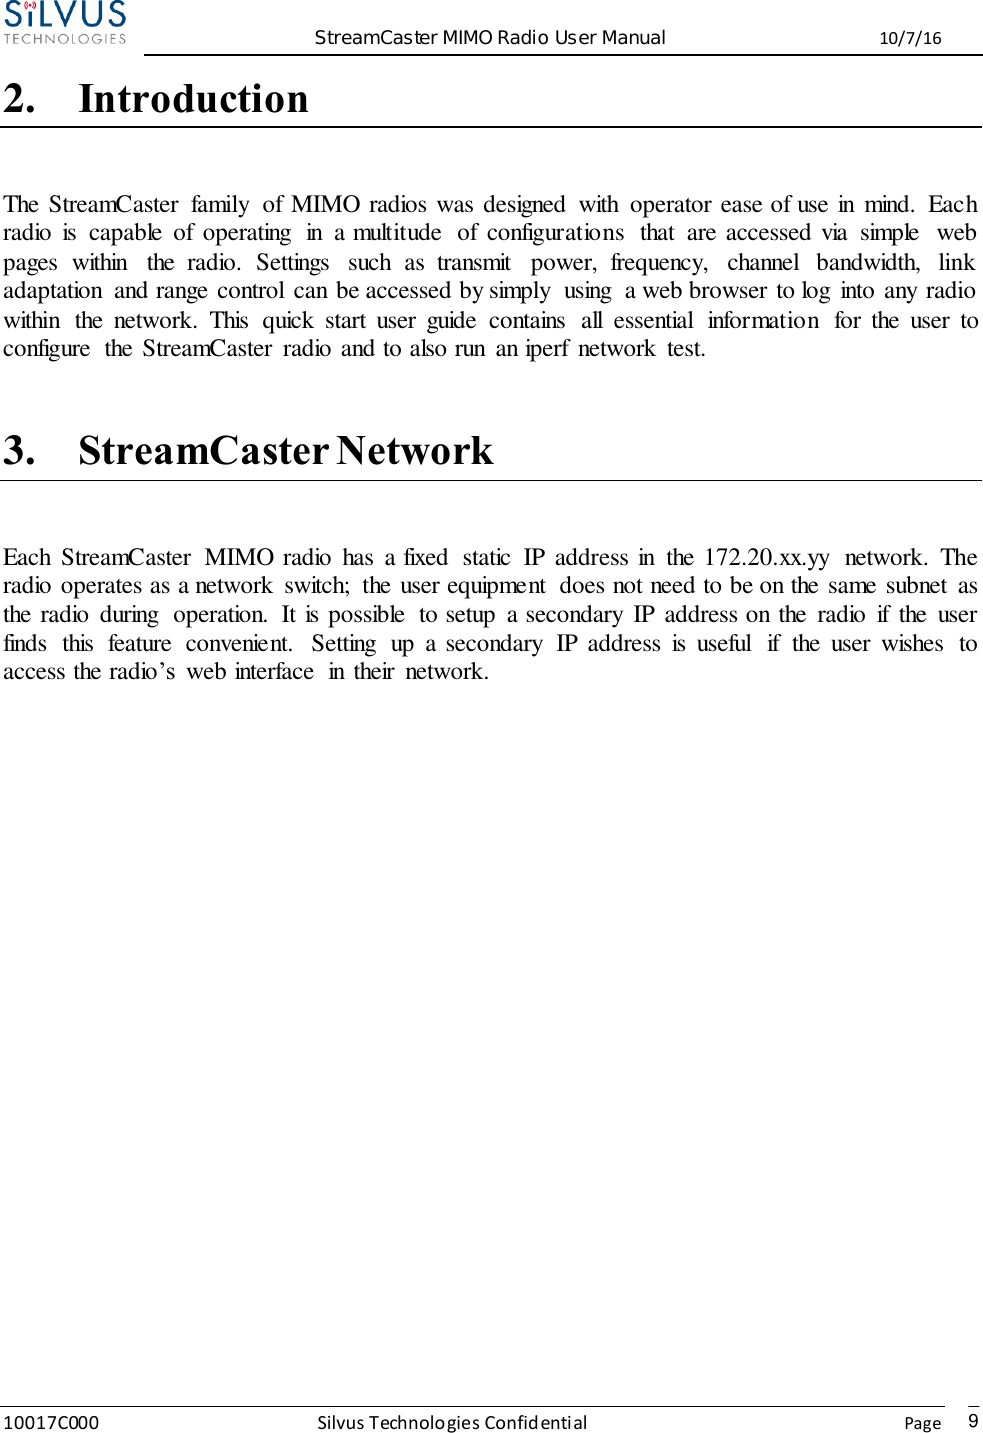  StreamCaster MIMO Radio User Manual  10/7/16 10017C000 Silvus Technologies Confidential    Page   9 2. Introduction The StreamCaster  family  of MIMO radios was designed  with  operator ease of use in  mind.  Each radio  is  capable  of  operating  in  a multitude  of  configurations  that  are accessed via  simple  web pages  within  the  radio.  Settings  such  as  transmit  power,  frequency,  channel  bandwidth,  link adaptation  and range control  can be accessed by simply  using  a web browser to log  into any radio within  the  network.  This  quick  start  user  guide  contains  all  essential  information  for  the  user  to configure  the StreamCaster  radio and to also run  an iperf  network  test.  3. StreamCaster Network Each  StreamCaster  MIMO radio  has  a fixed  static  IP address in  the 172.20.xx.yy  network.  The radio operates as a network  switch;  the user equipment  does not need to be on the same subnet  as the radio  during  operation.  It is possible  to setup  a secondary  IP address on the  radio  if  the  user finds  this  feature  convenient.  Setting  up  a secondary  IP address  is  useful  if  the  user  wishes  to access the radio’s  web interface  in  their  network.           